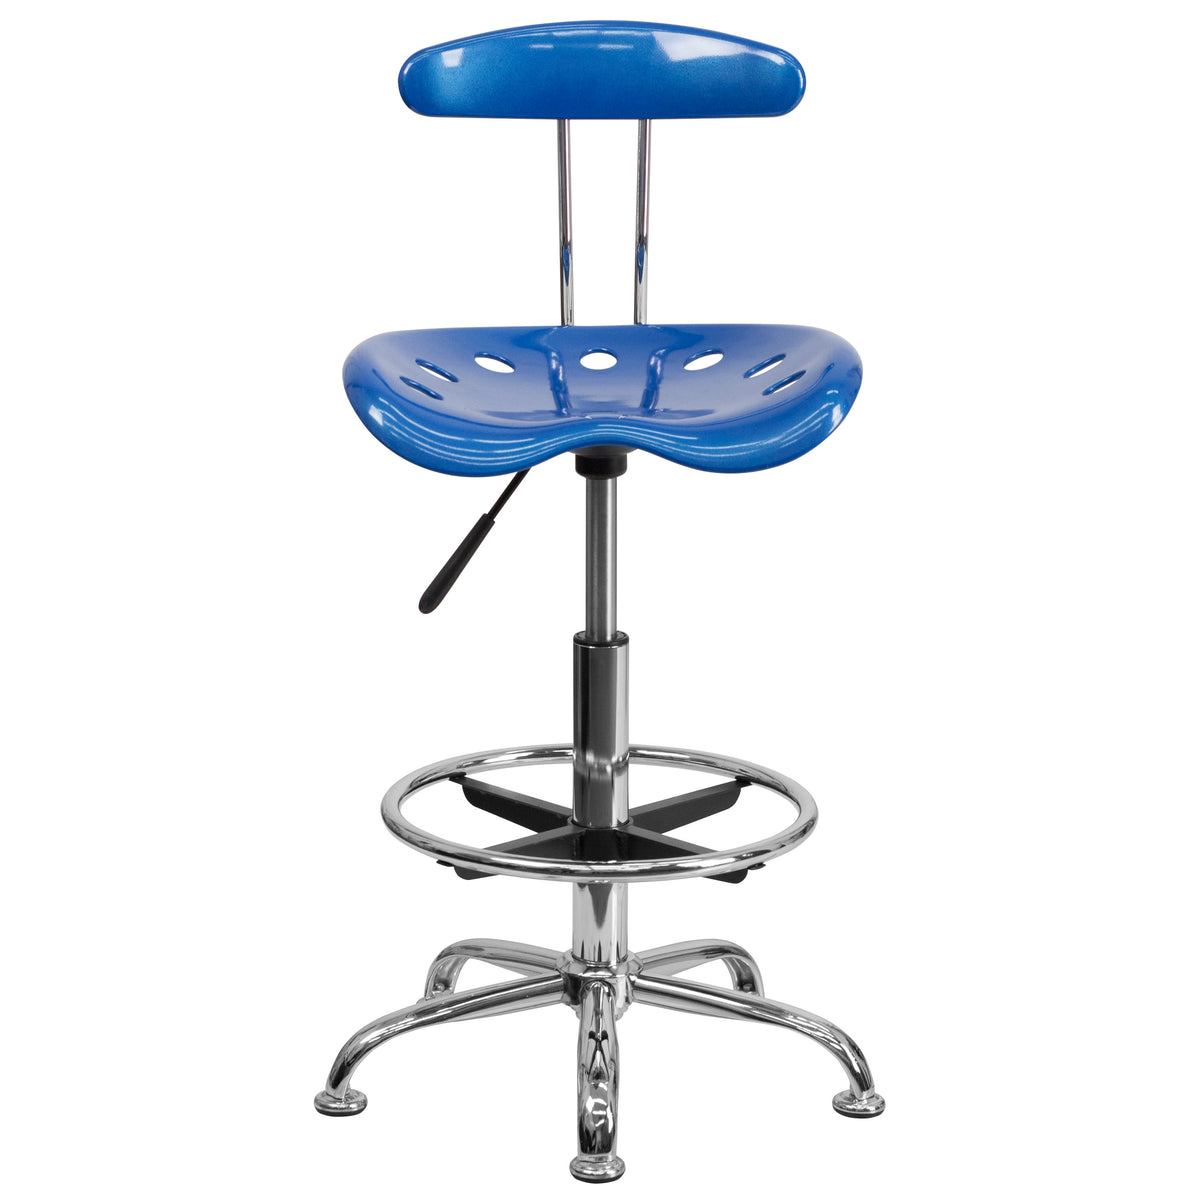 Bright Blue |#| Vibrant Bright Blue and Chrome Drafting Stool with Tractor Seat